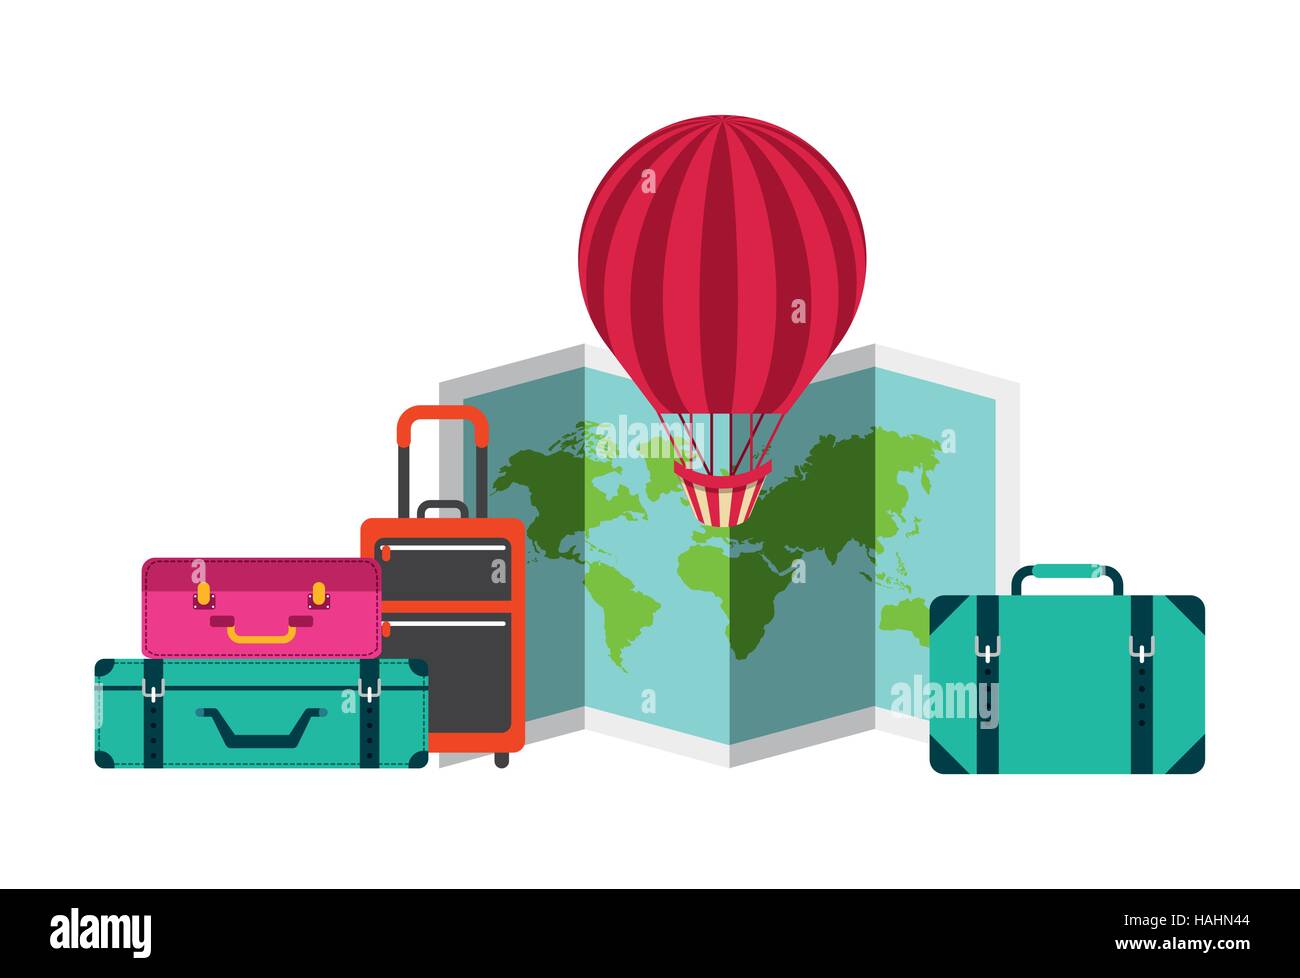 air balloon and travel suitcases over white background. colorful design. vector illustration Stock Vector